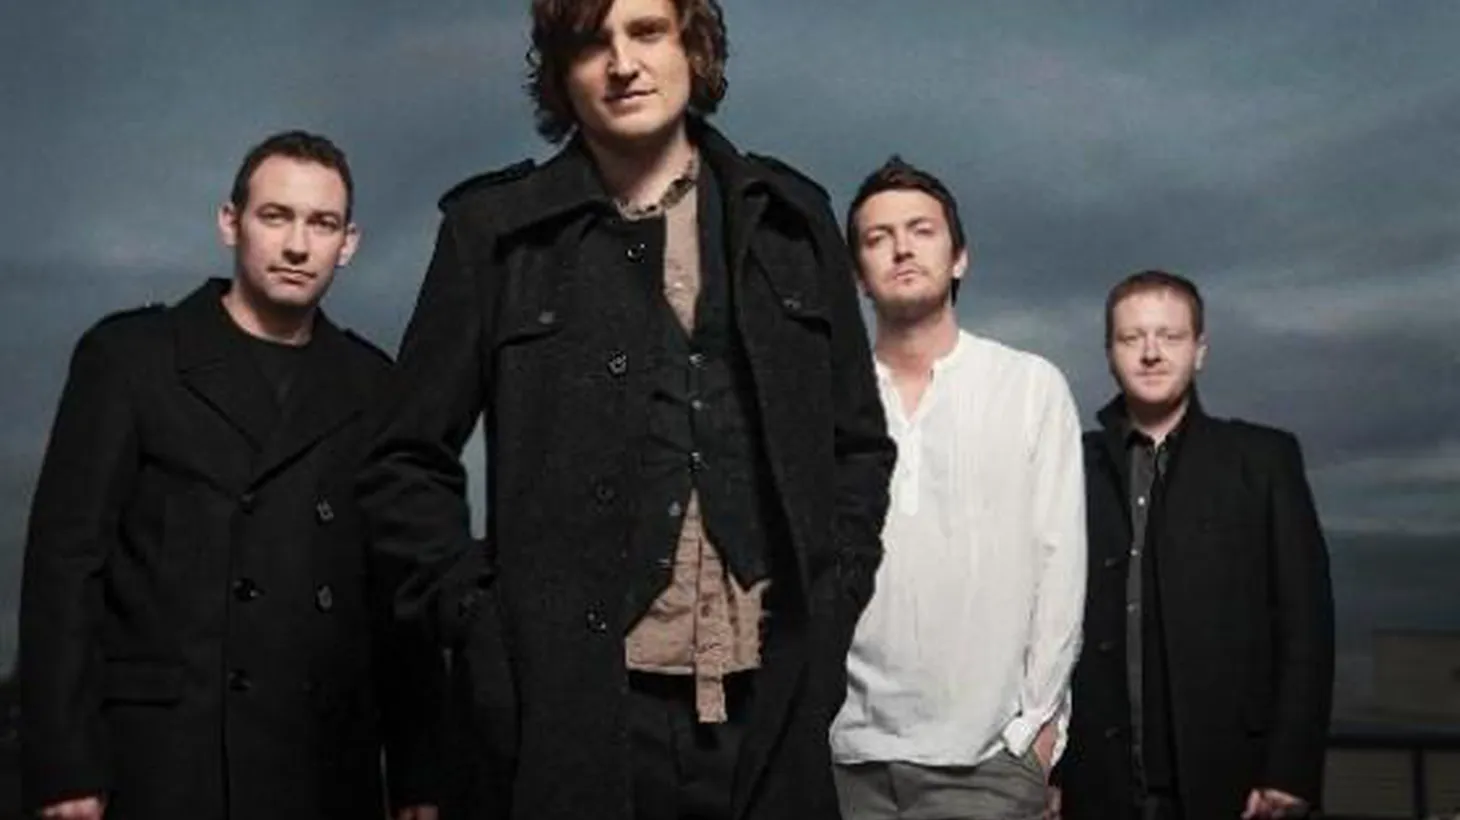 Starsailor return to share new songs on Morning Becomes Eclectic at 11:15am.